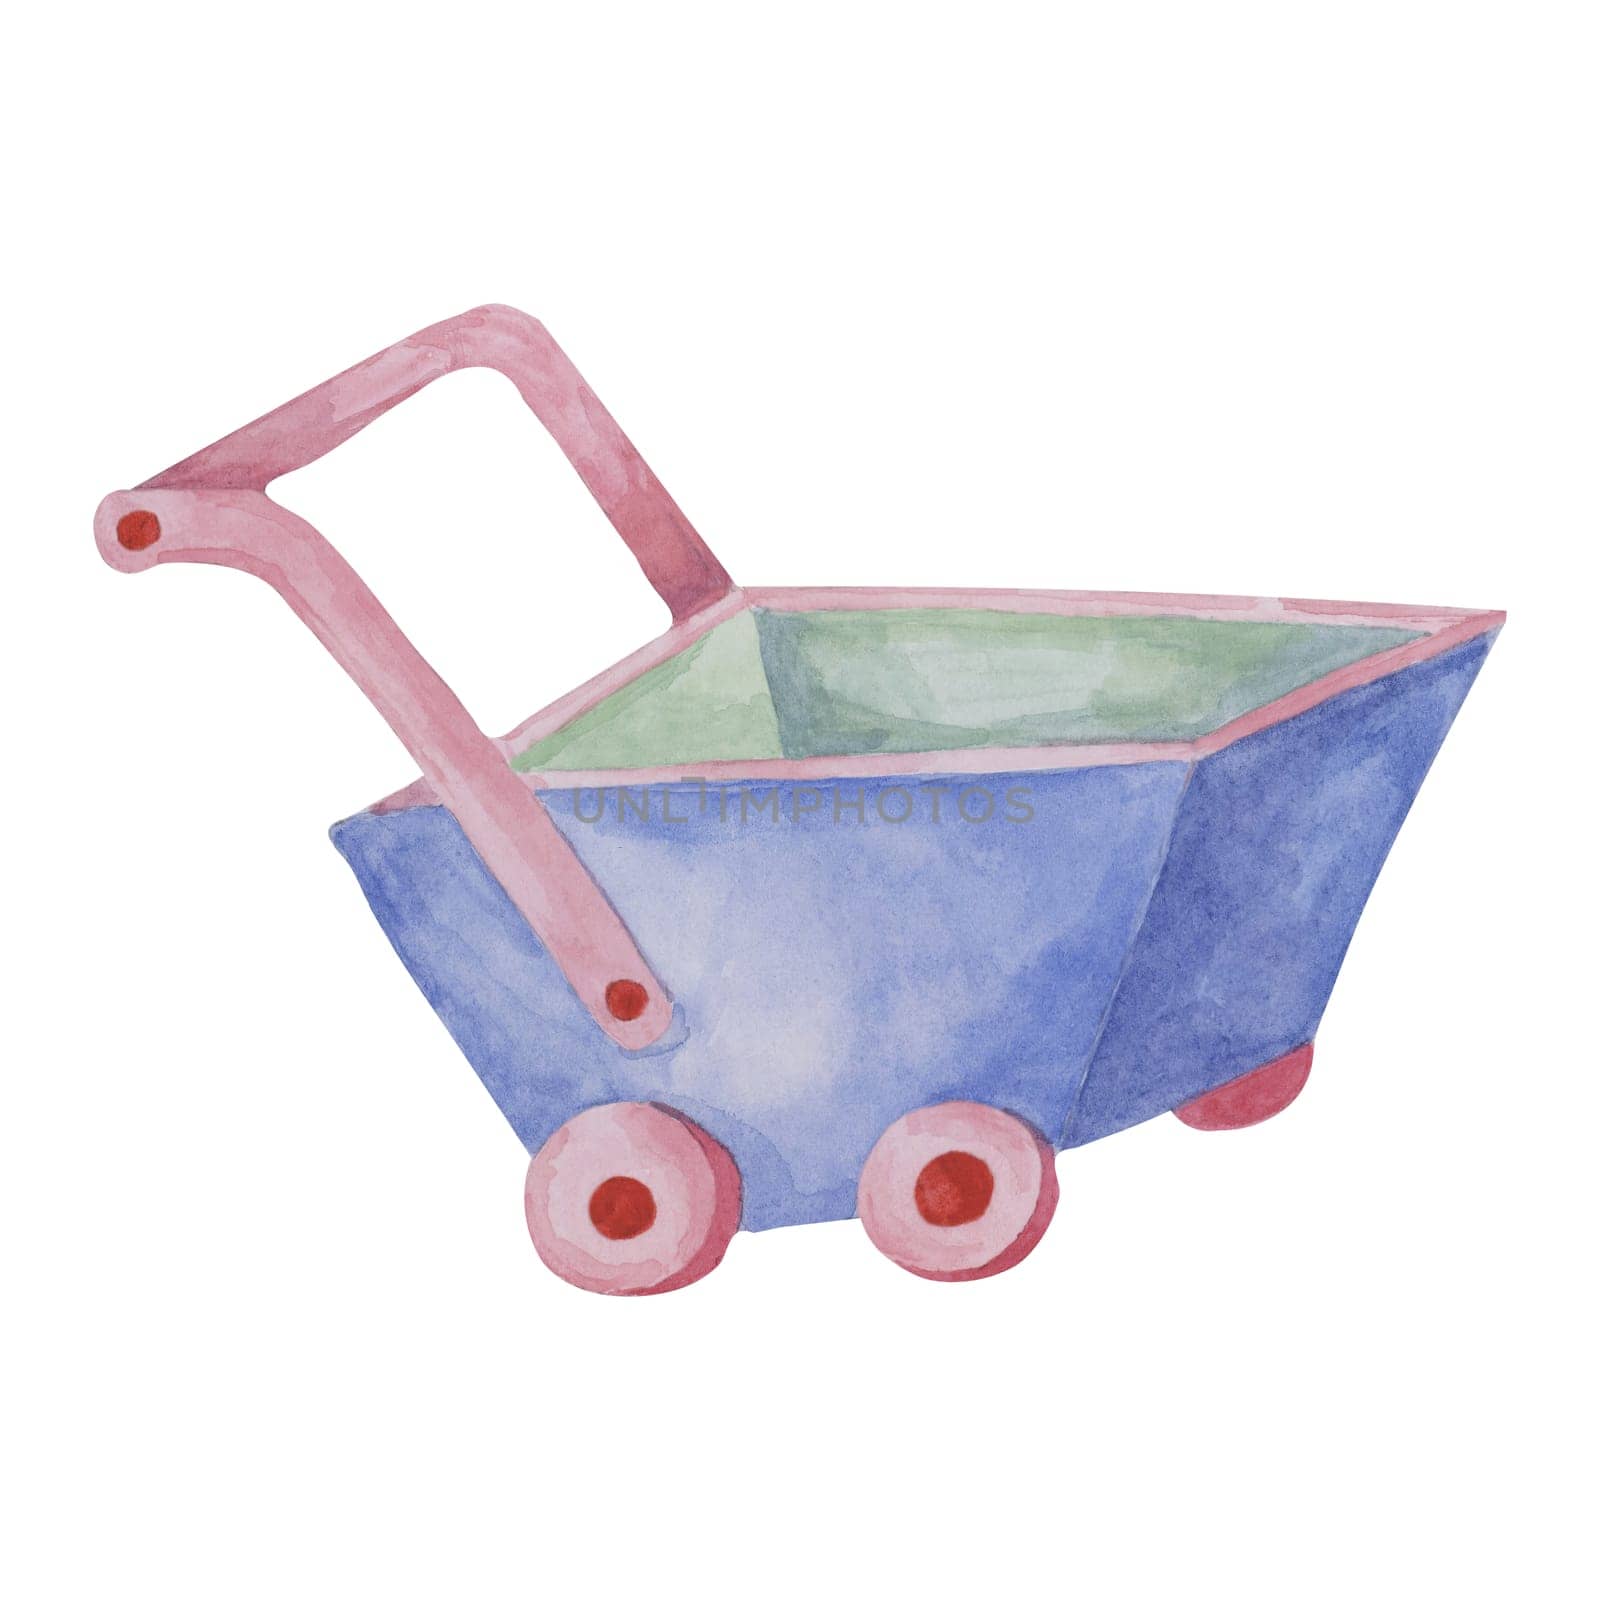 Wheelbarrow vintage blue toy. Wooden cart, eco play object clipart. Retro gardening tool watercolor illustration for kids party, sticker, scrapbooking, invitations, baby shower, nursery decor